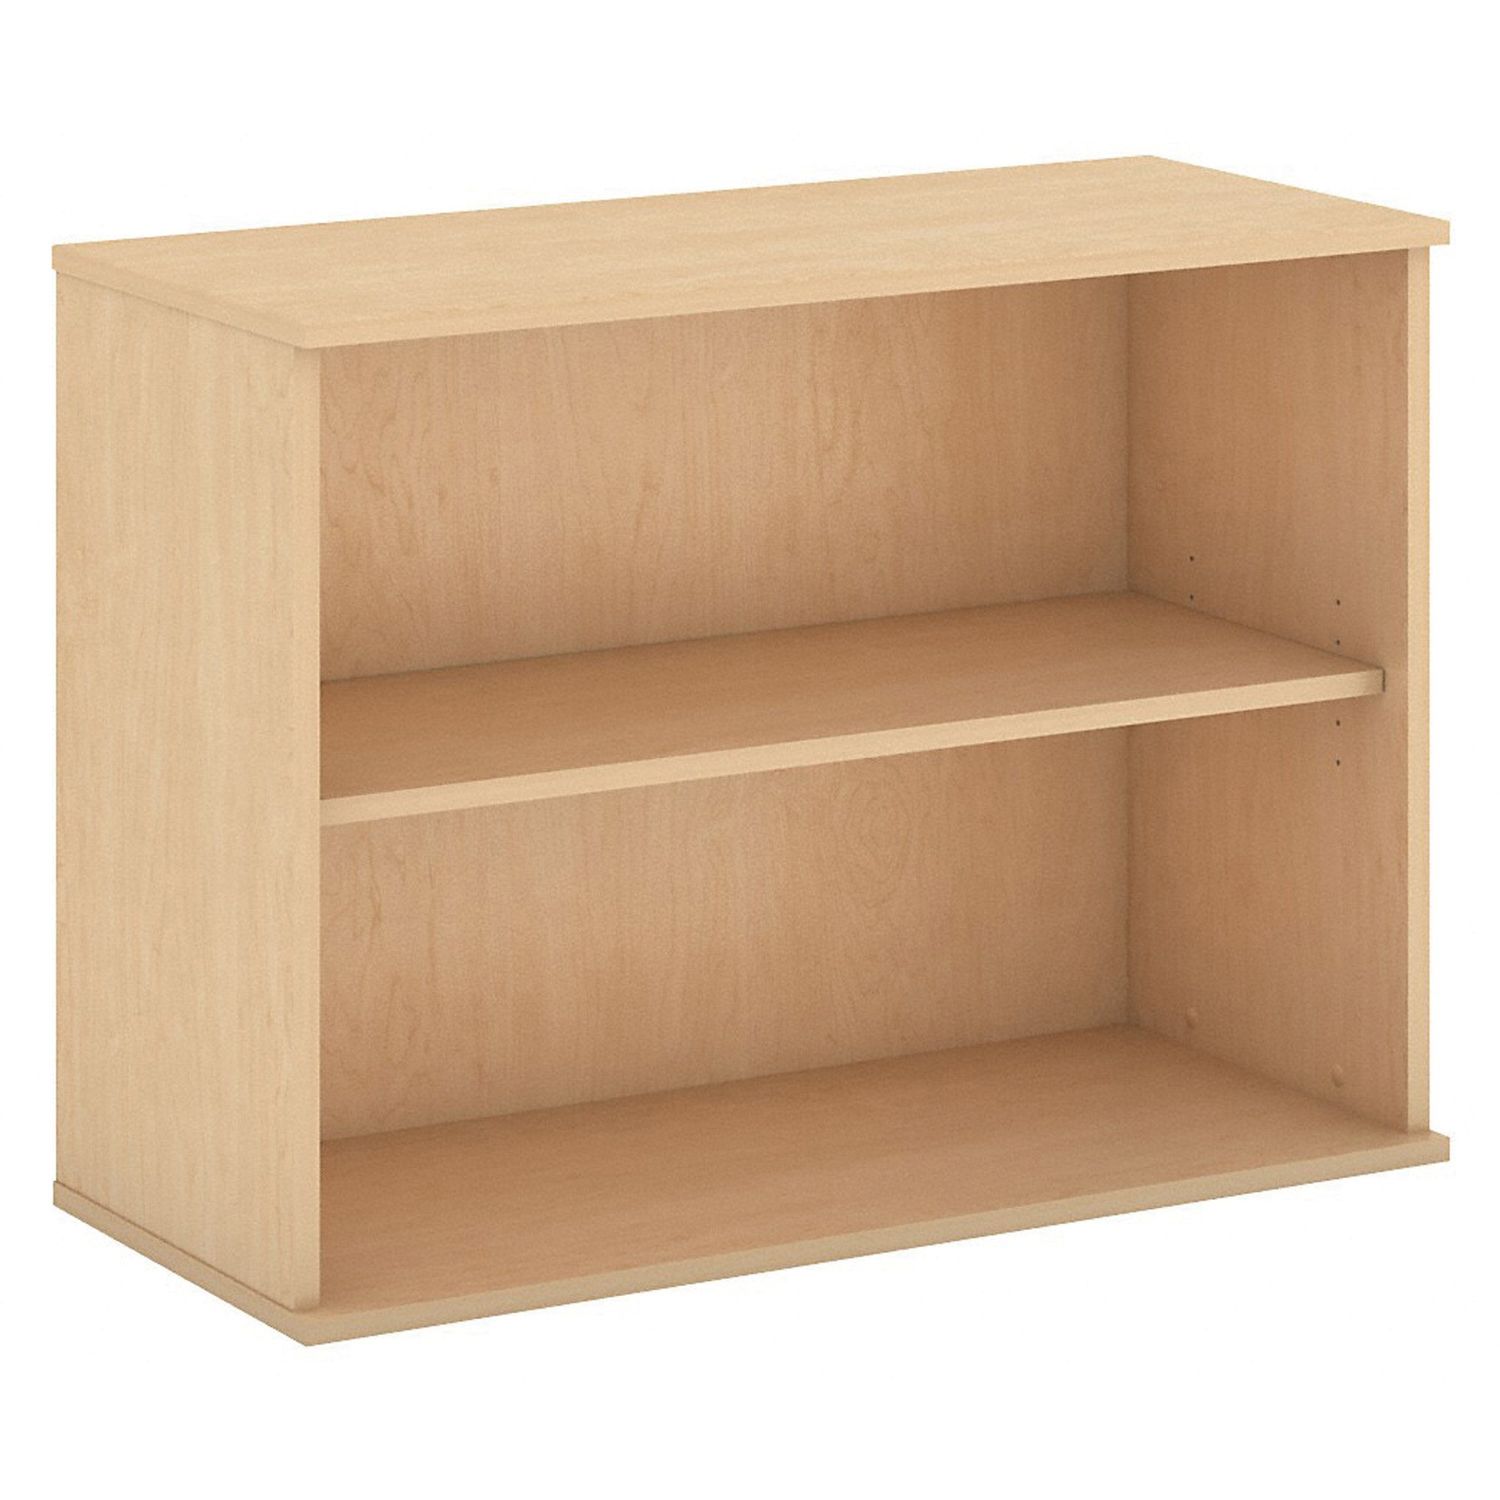 Bookcase; Natural Maple 2 Compartment(s), 29.1" Height x 35.7" Width x 15.5" Depth, Durable, Scratch Resistant, Stain Resistant, Adjustable Shelf, 50, 1 Each